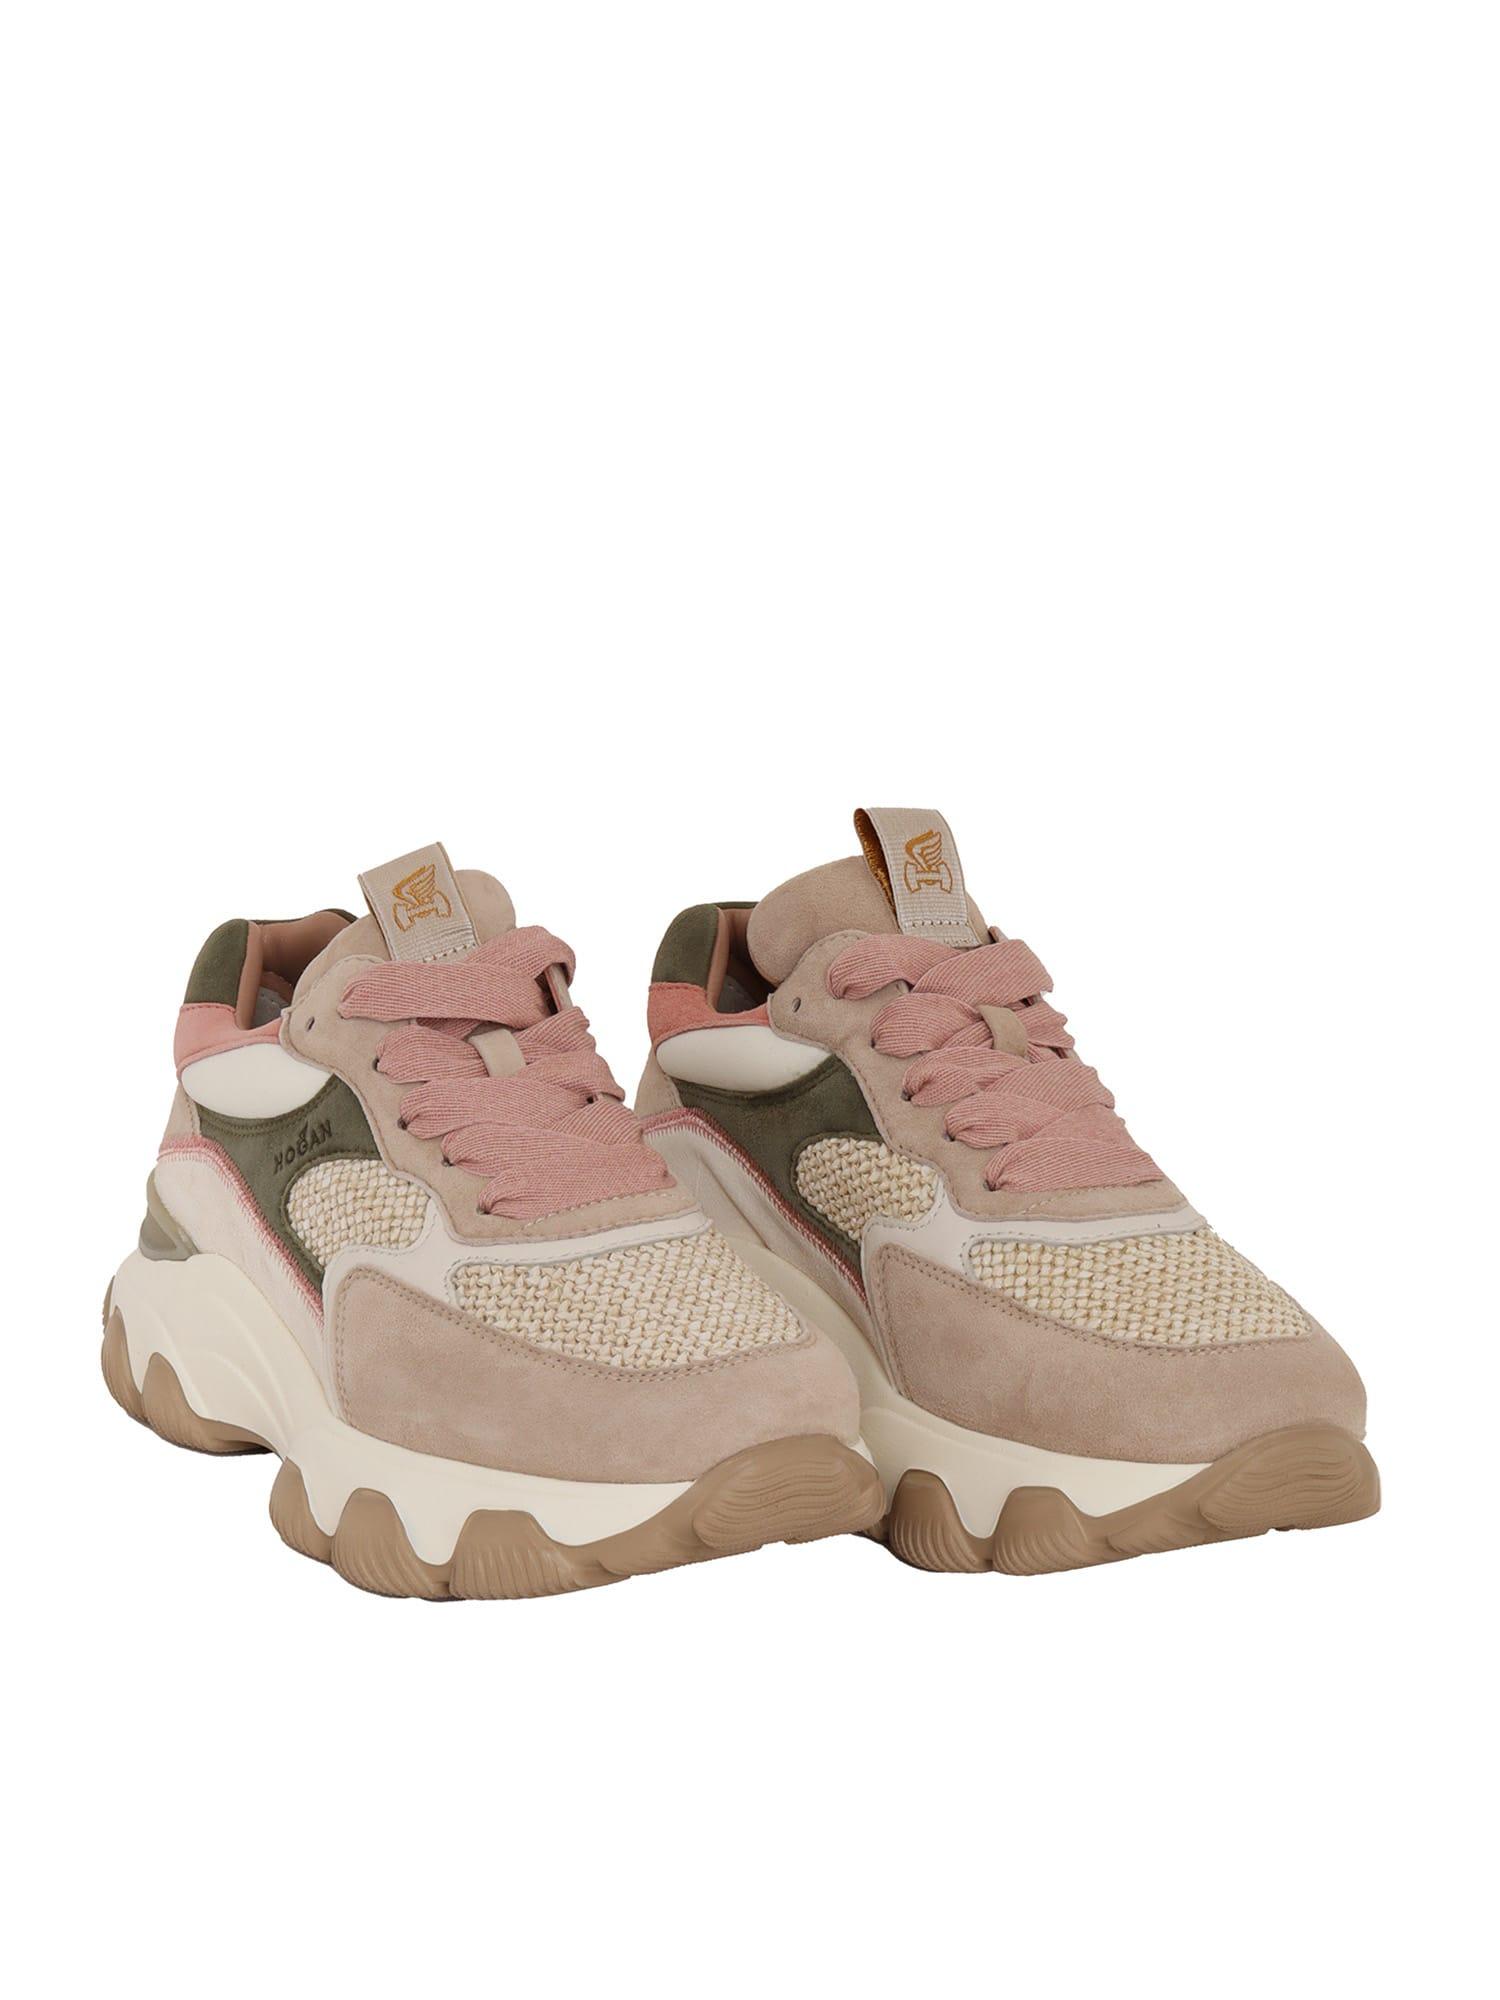 Hogan Hyperactive Lace Sneakers in Pink | Lyst